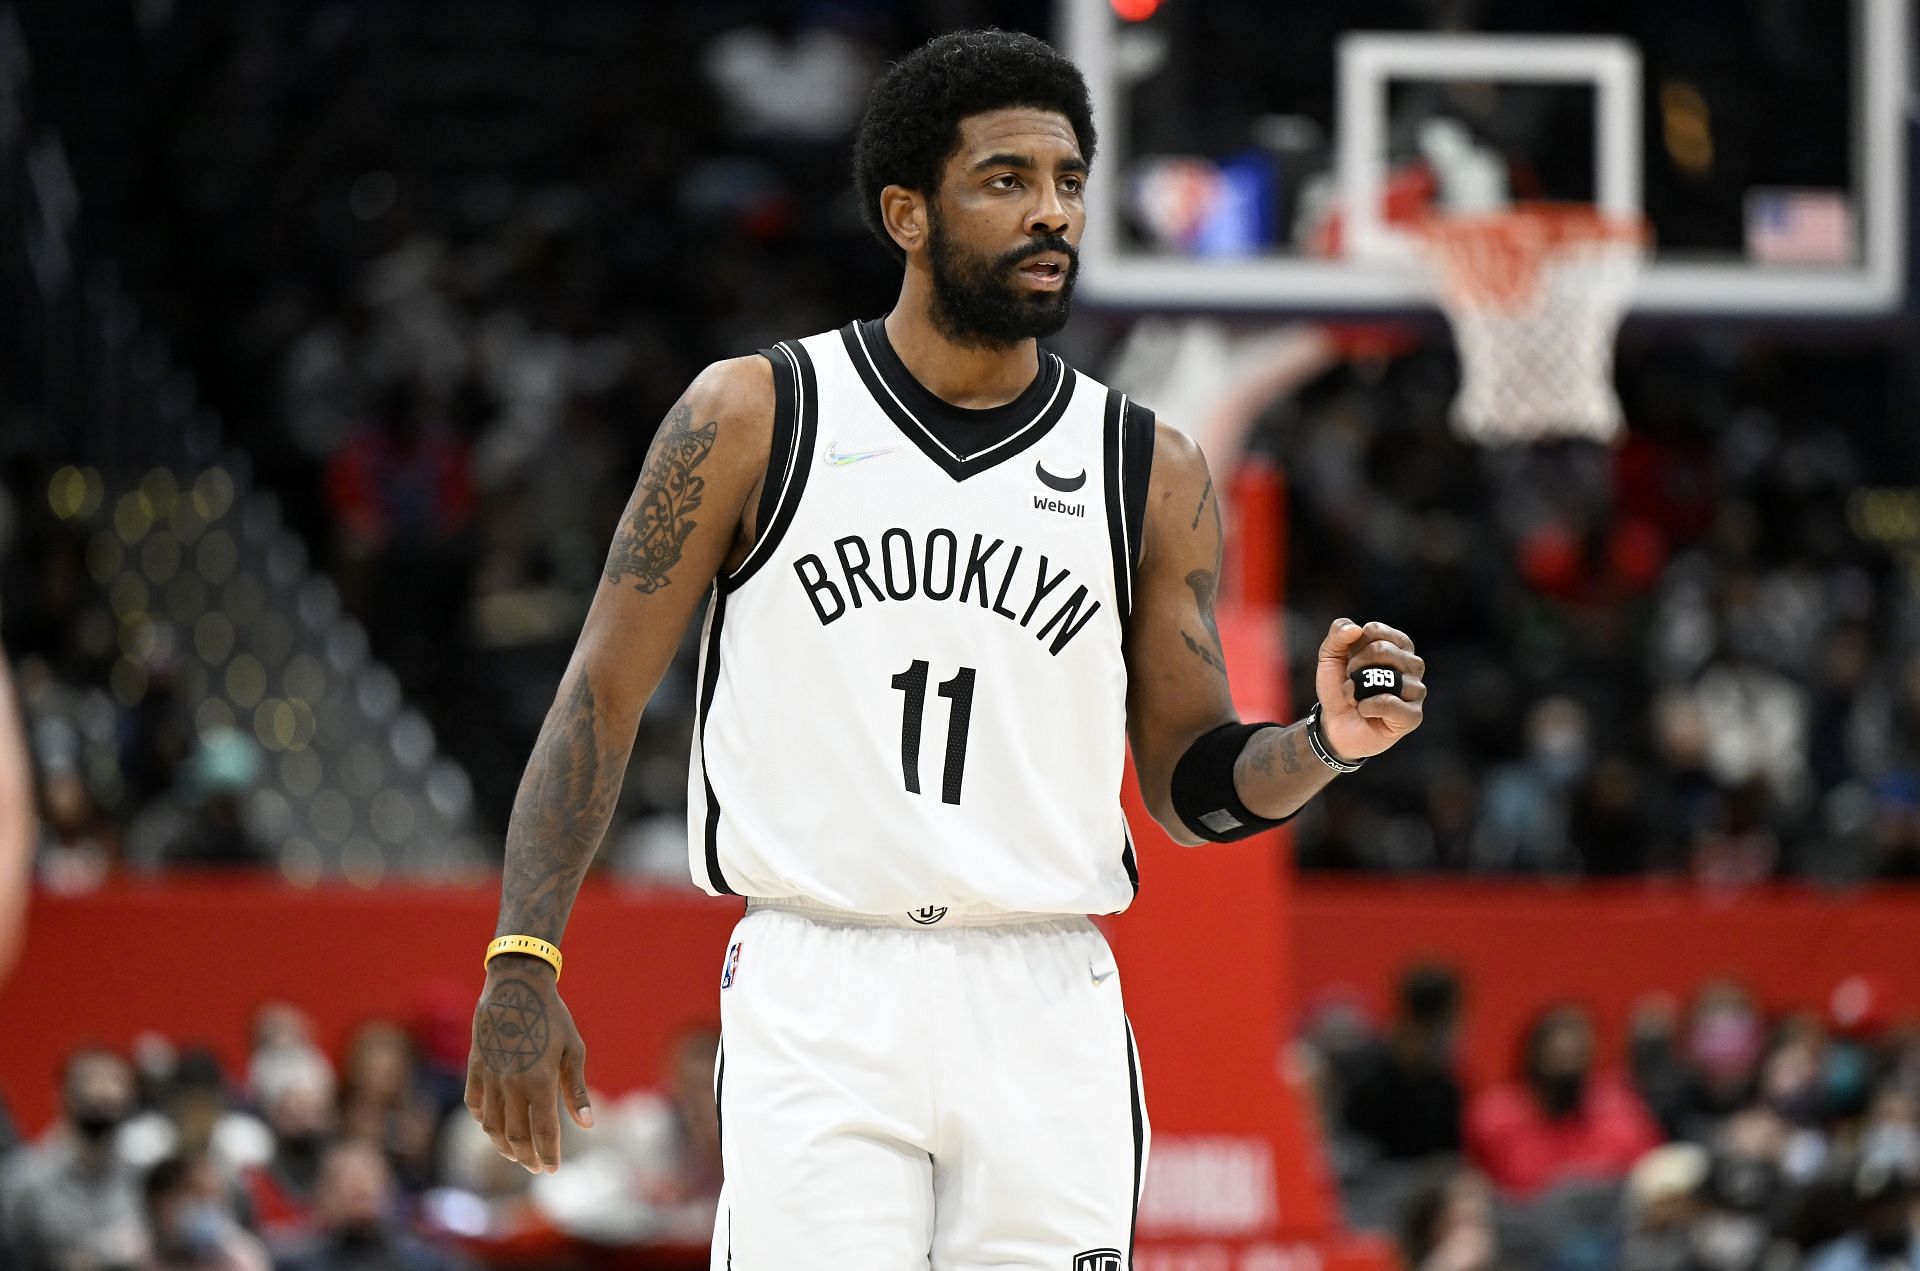 Brooklyn Nets superstar Kyrie Irving (#11) during a game.